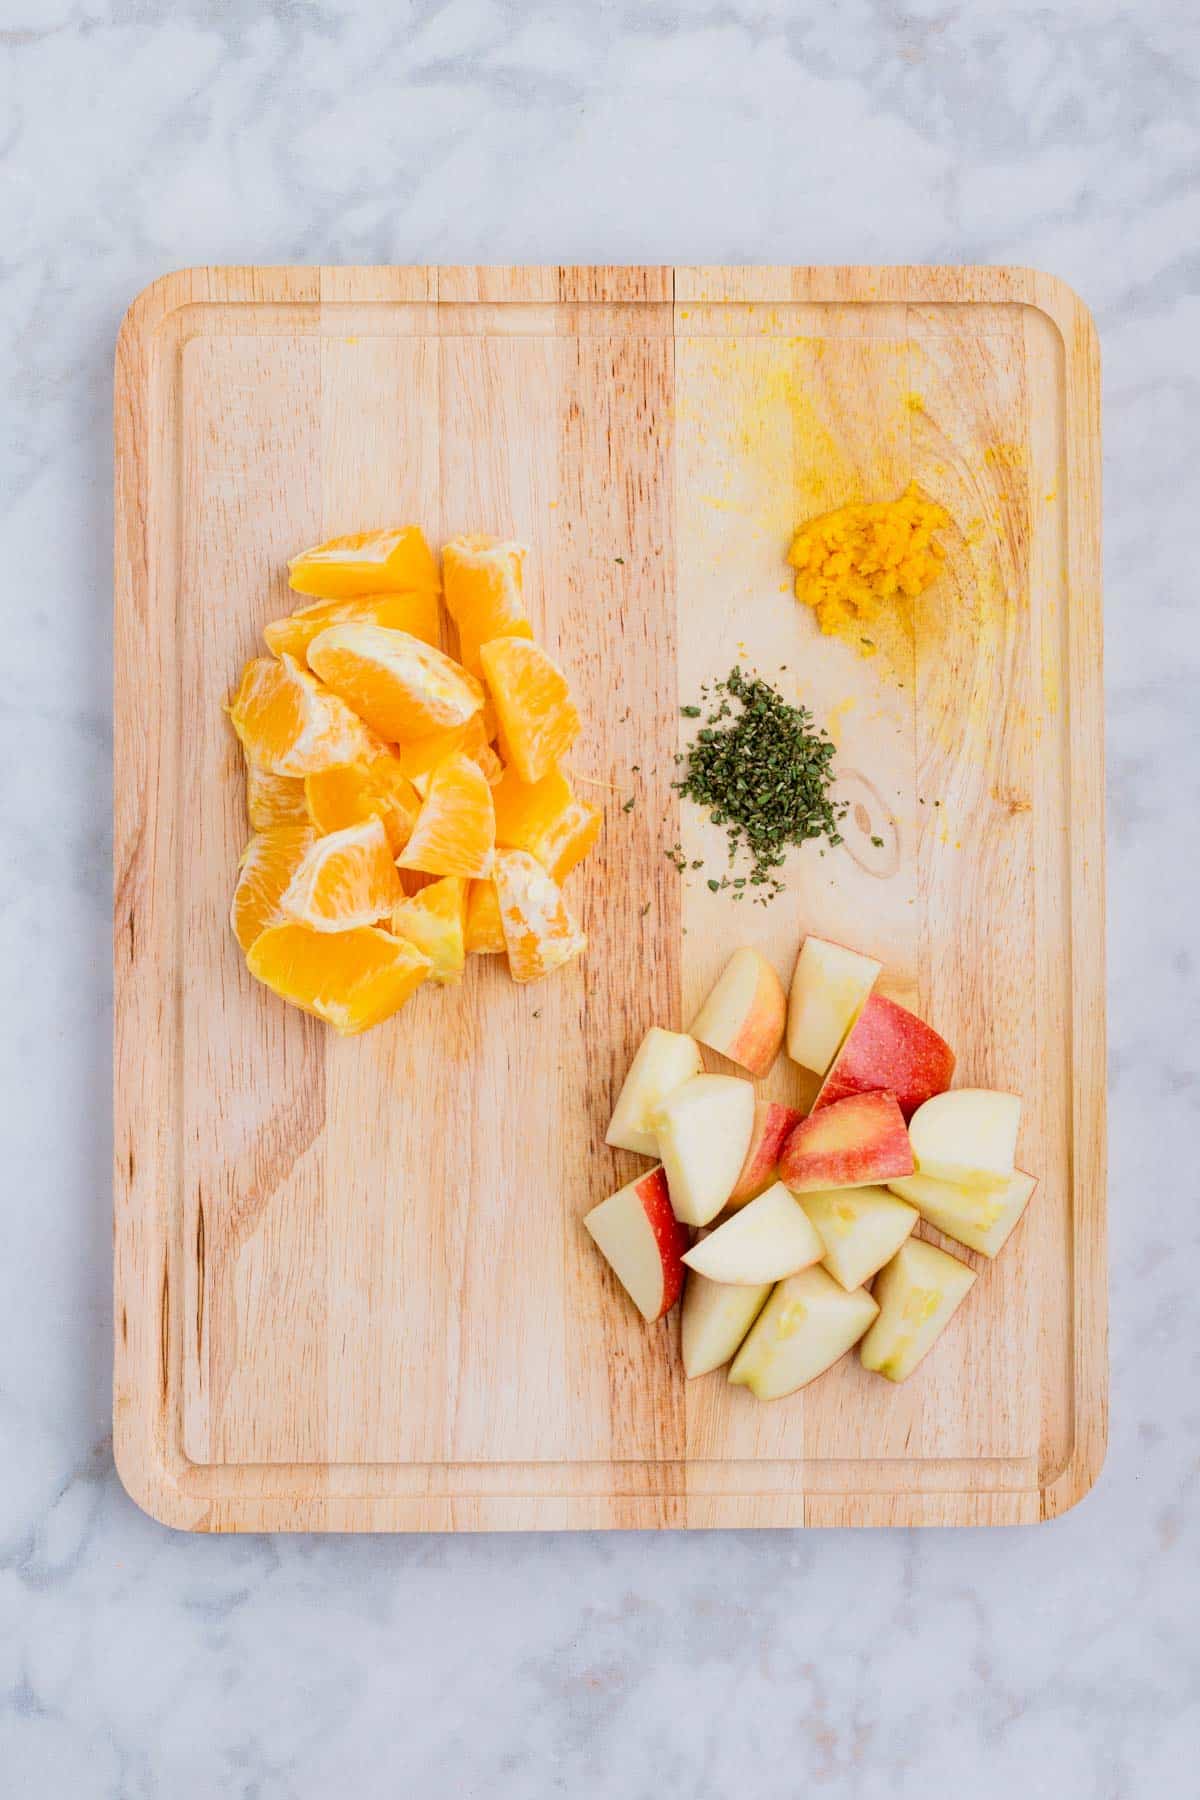 Apple, orange, and herbs are prepped for this recipe.